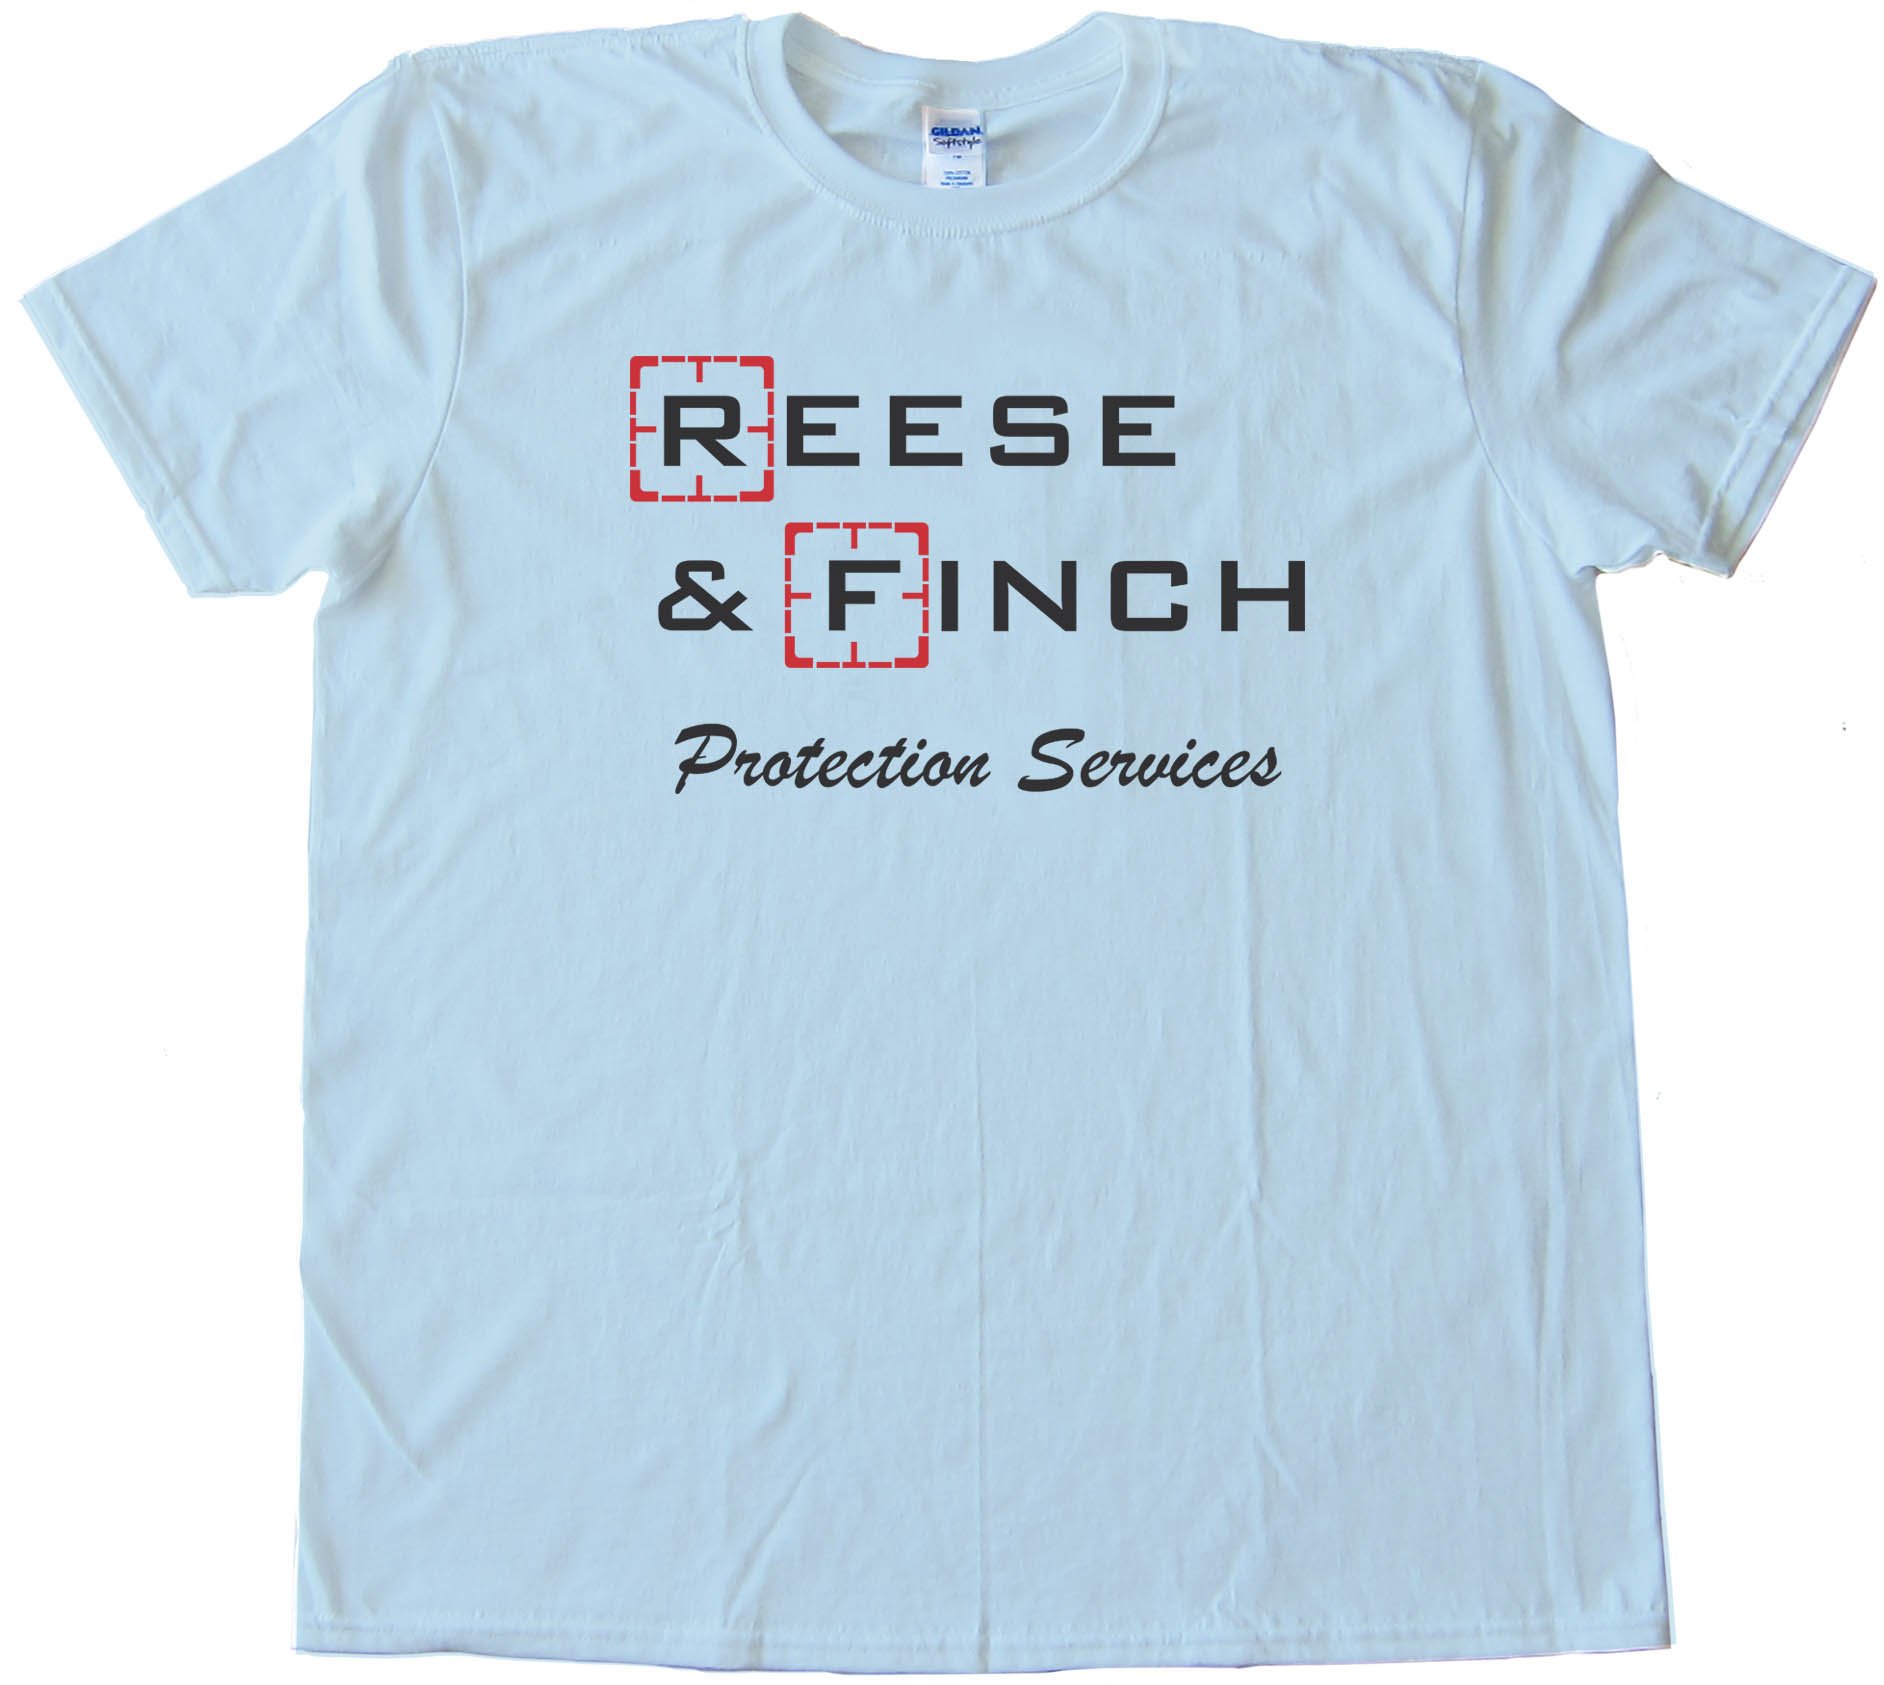 Person Of Interest - Tee Shirt